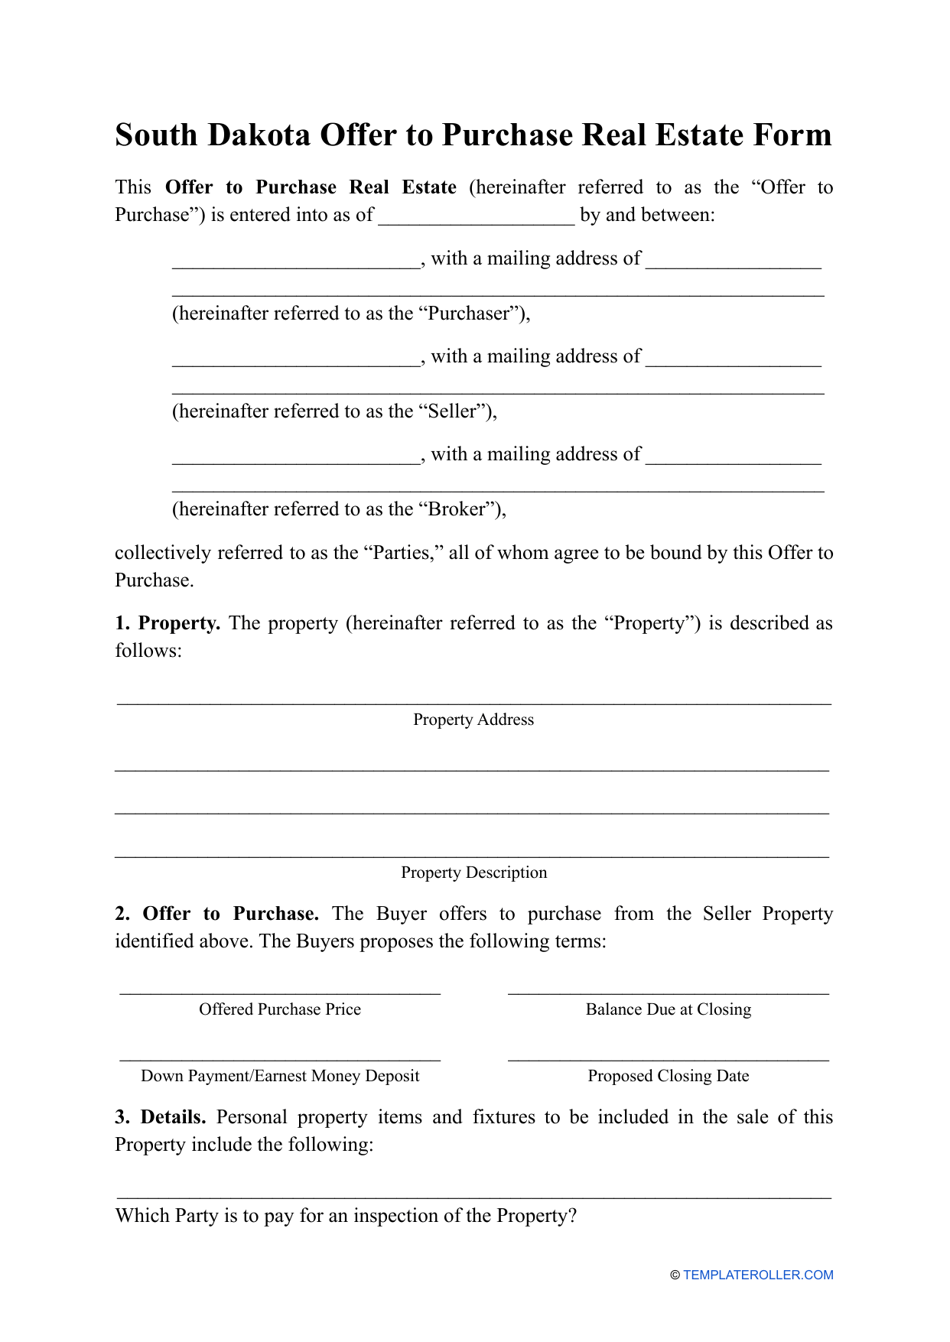 Offer to Purchase Real Estate Form - South Dakota, Page 1